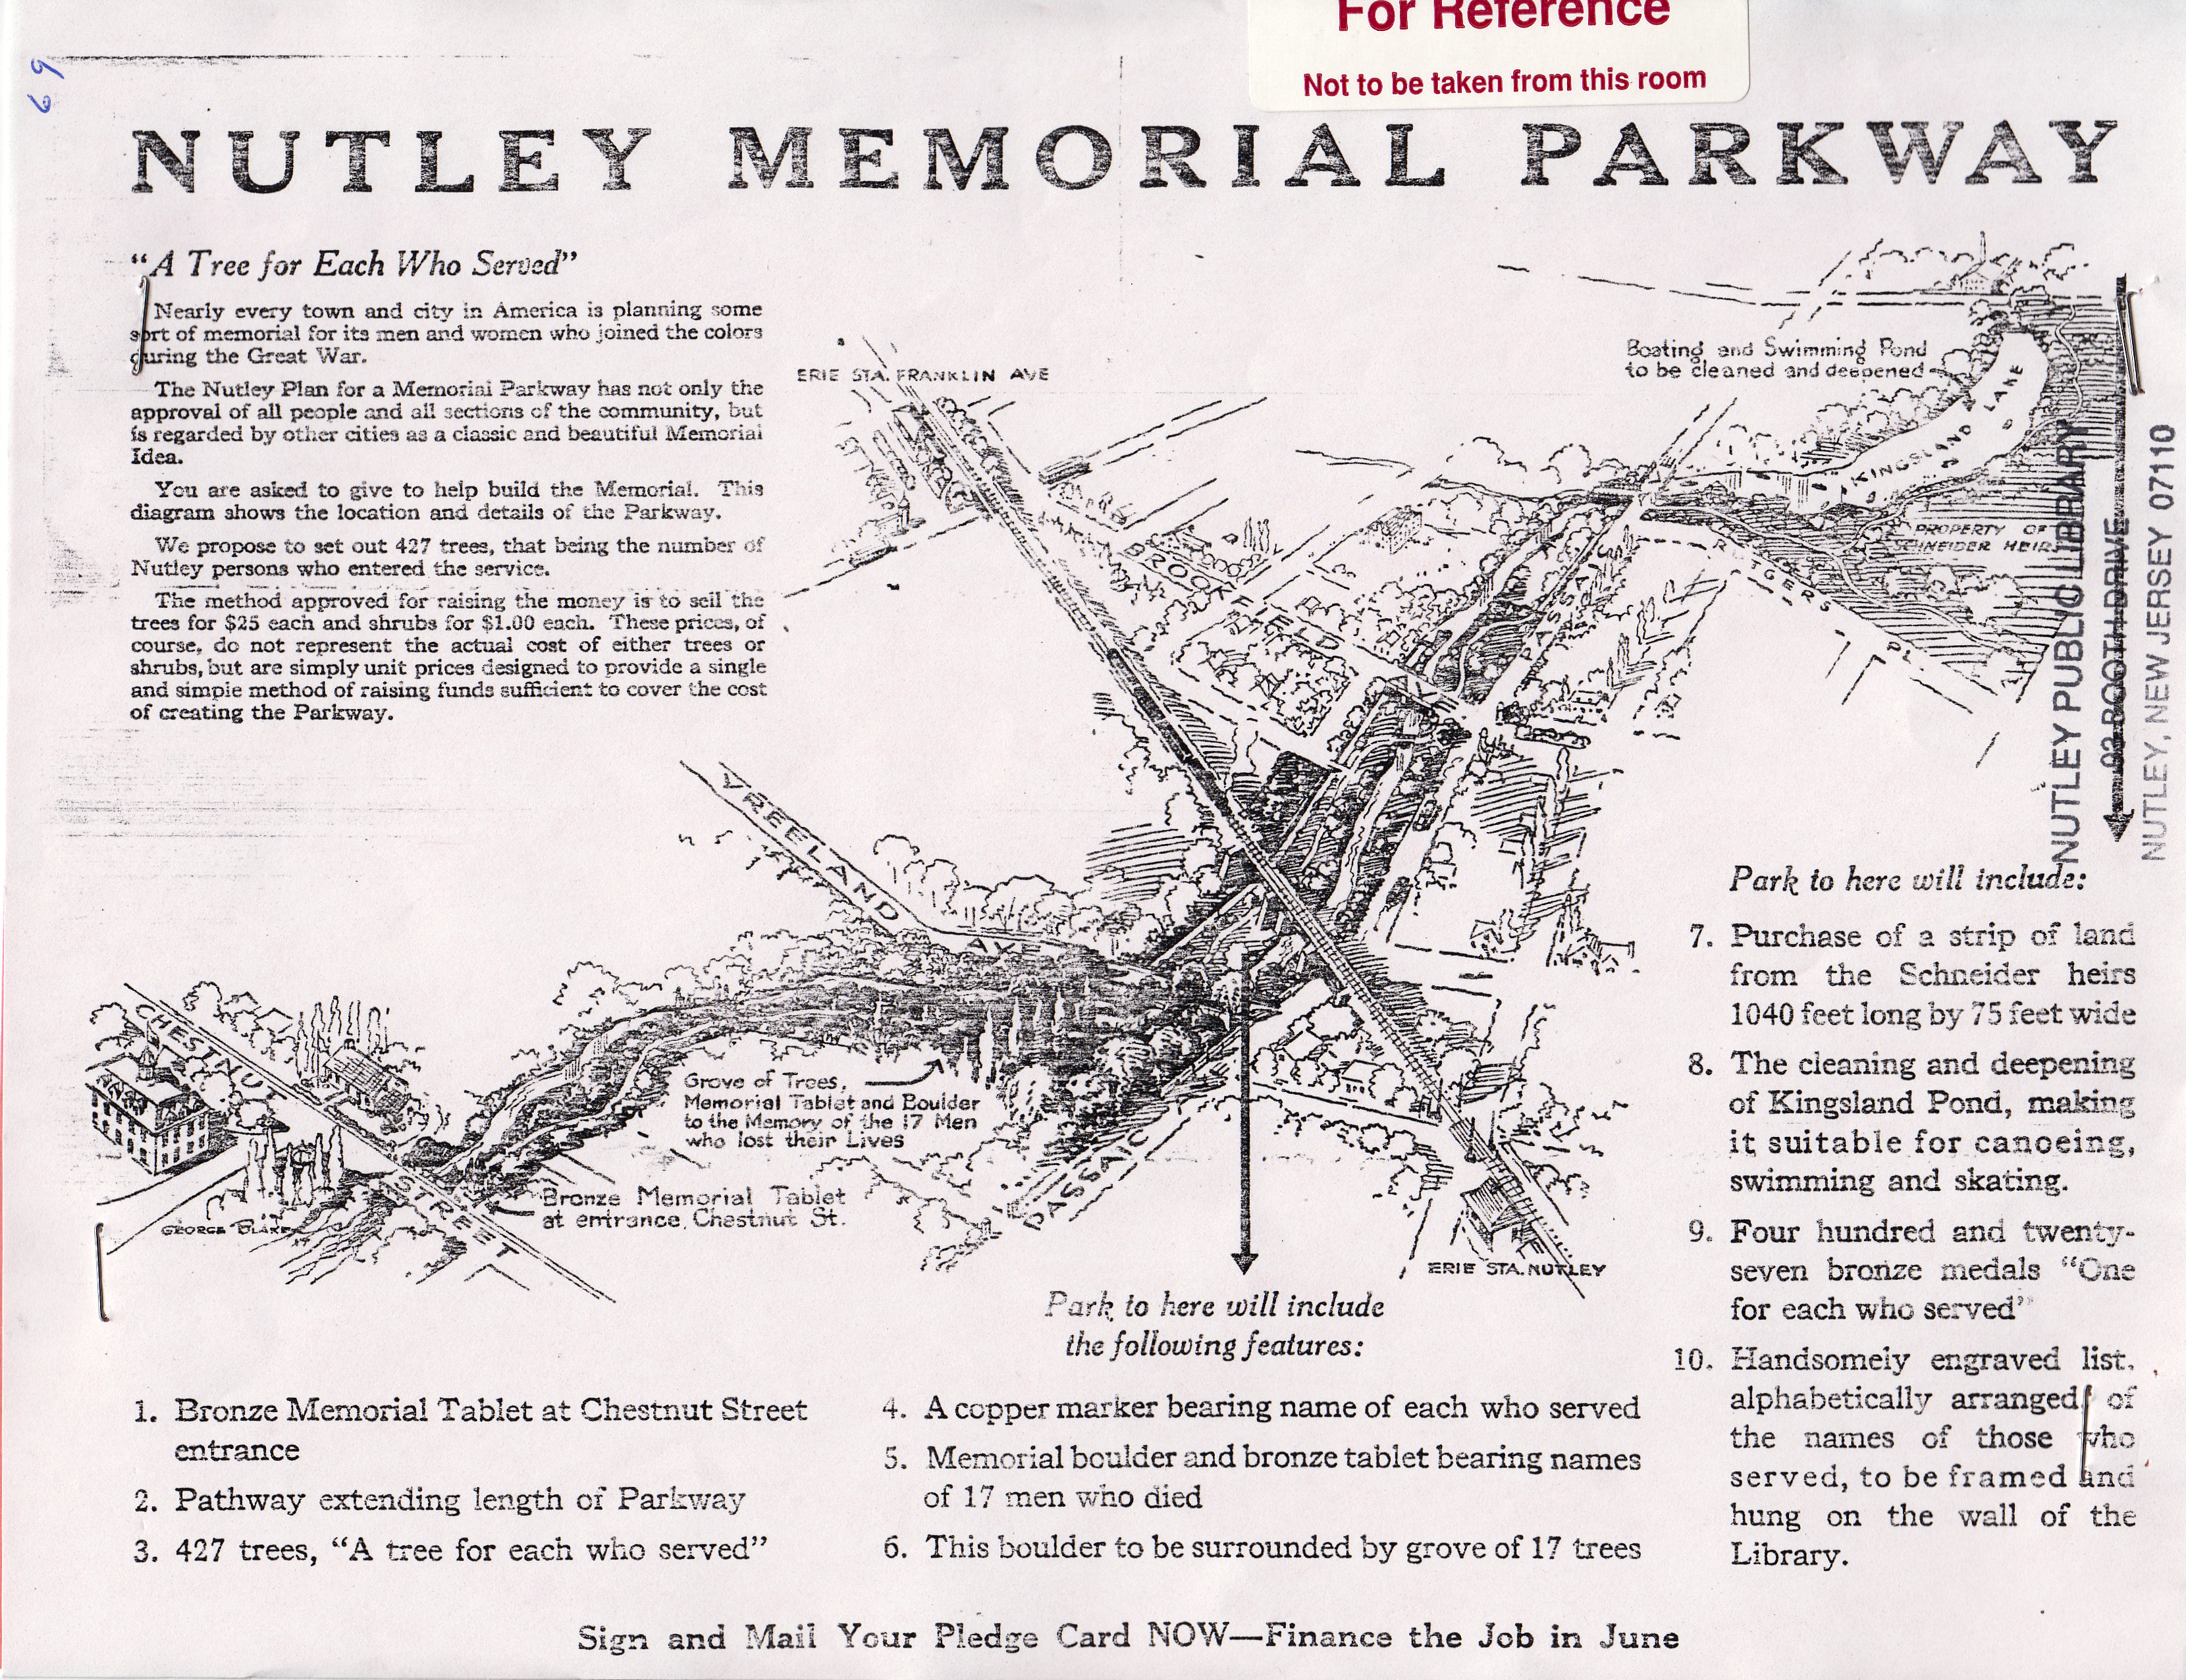 Nutley Memorial Parkway original plans for trees and shrubs